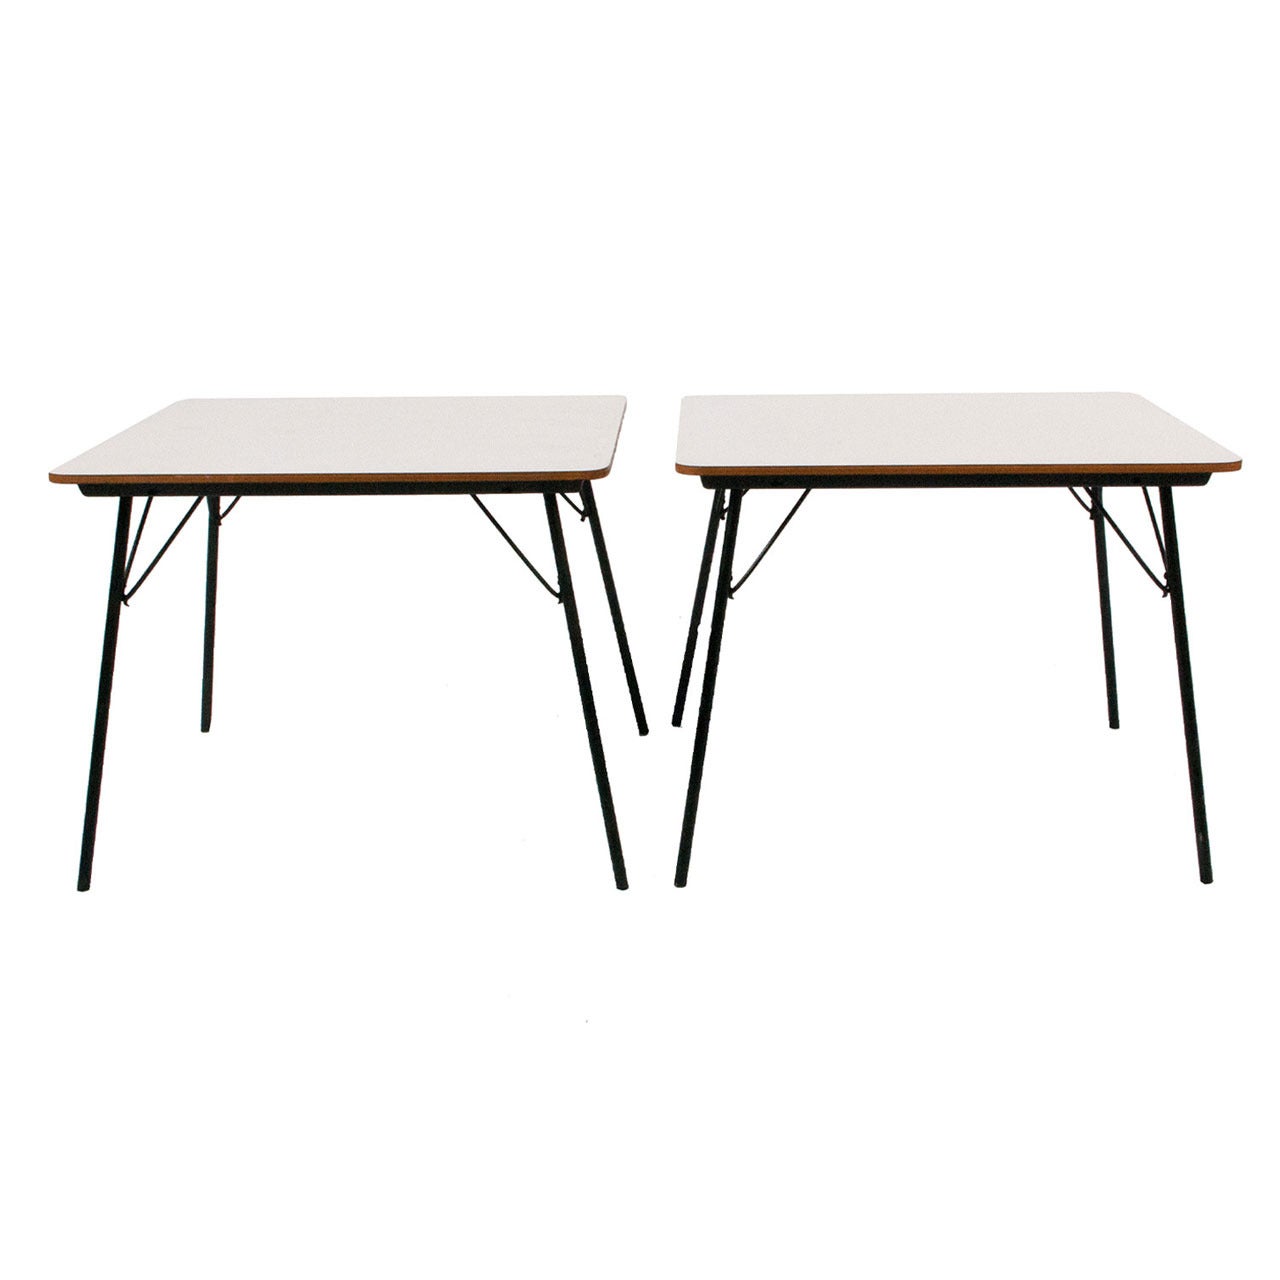 Pair of IT-10 Folding Childs Side Tables by Charles Eames